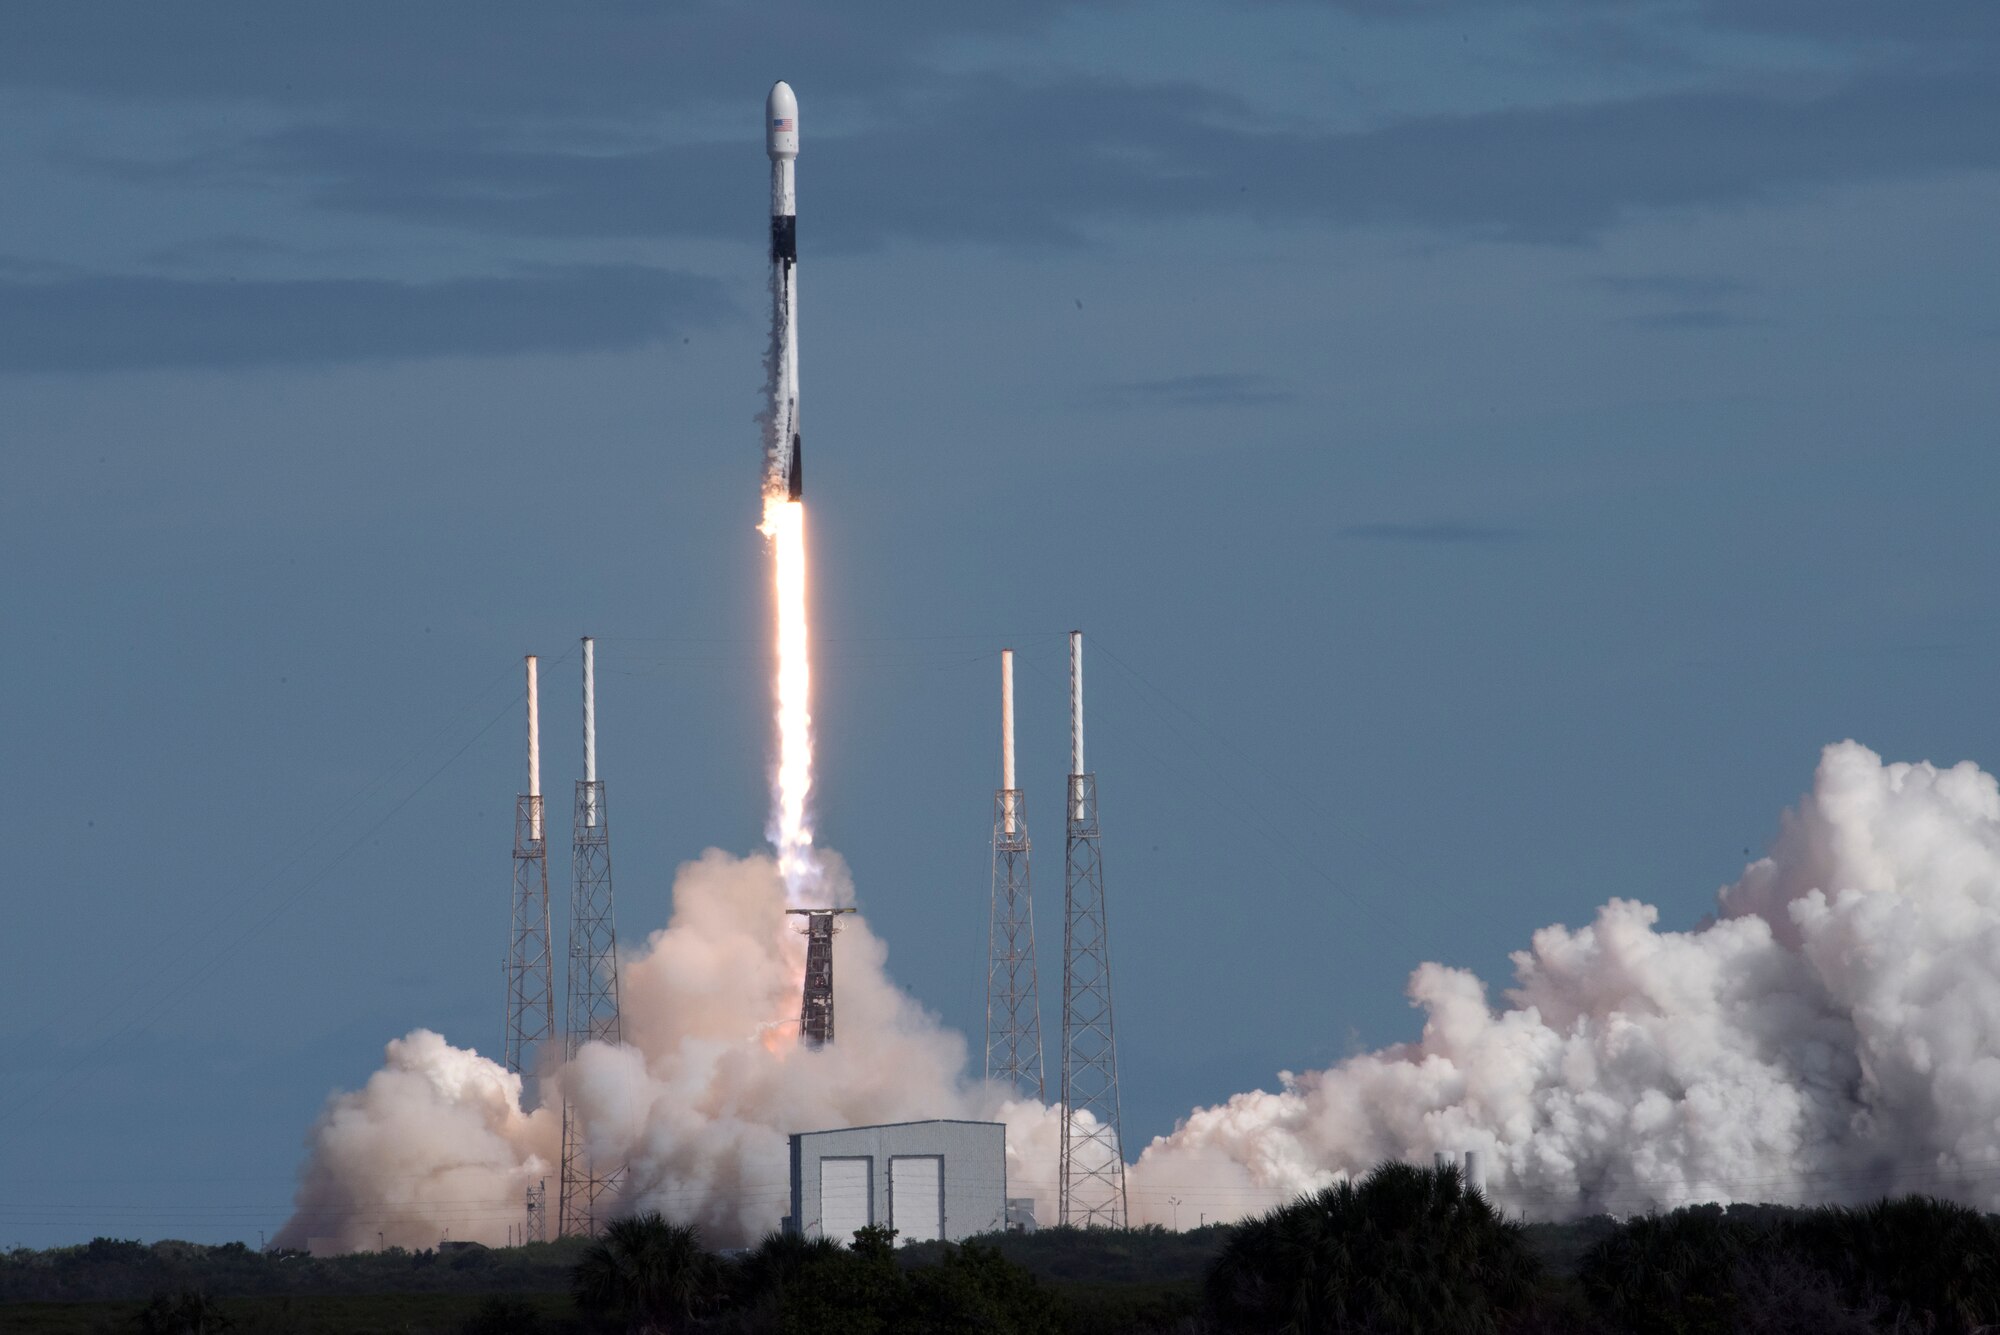 A Falcon 9 rocket launches at Cape Canaveral Air Force Station